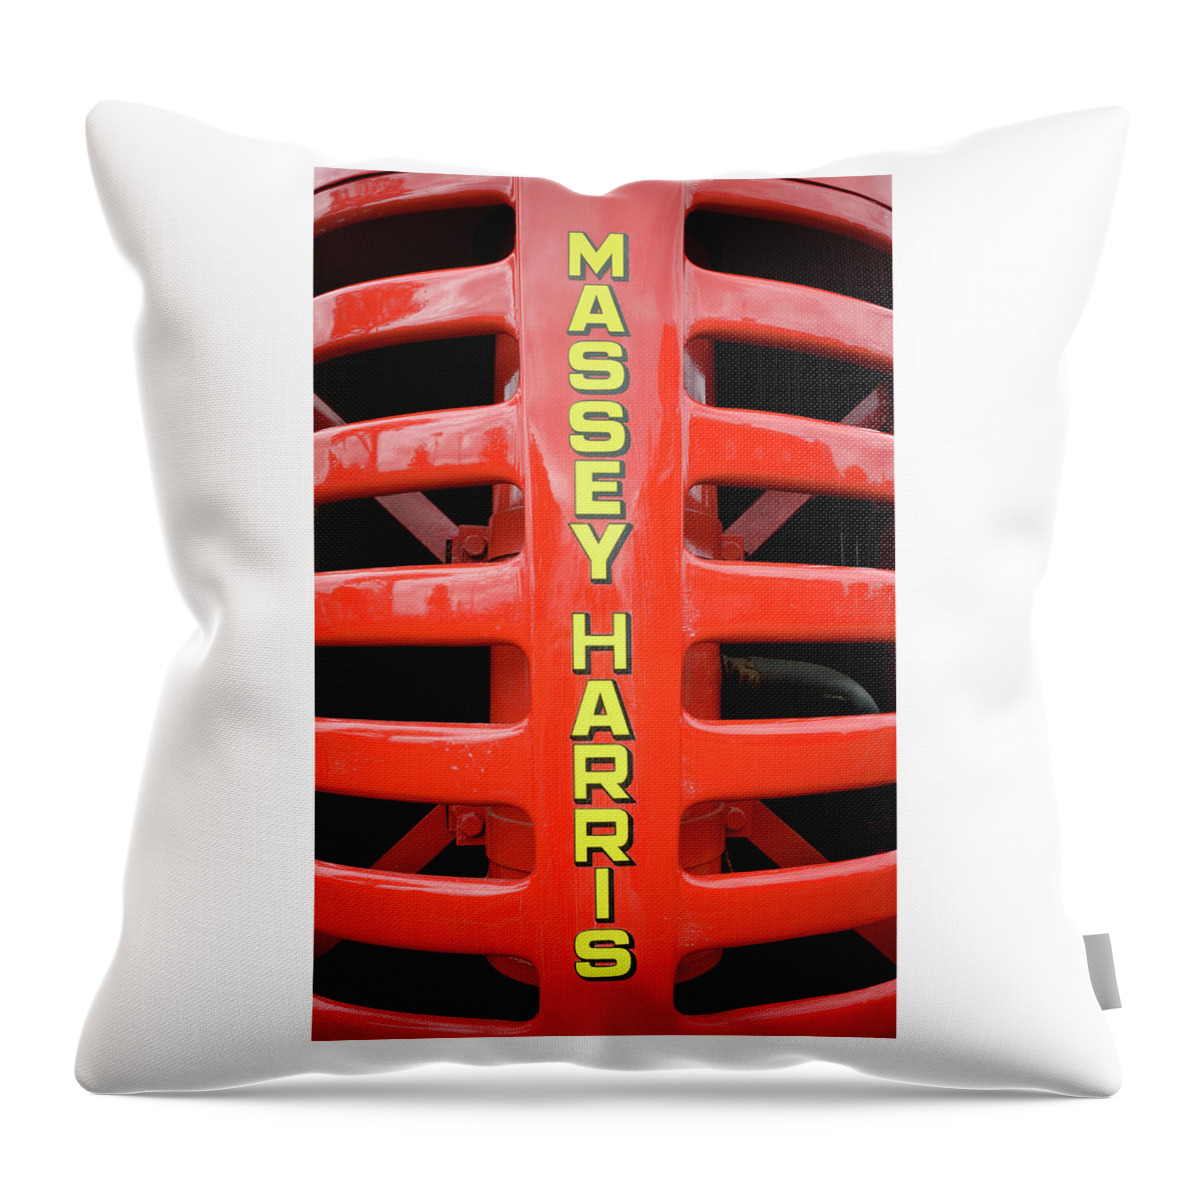 Red Tractor Throw Pillow featuring the photograph Massey Harris Red Tractor Rib Cage by Luke Moore